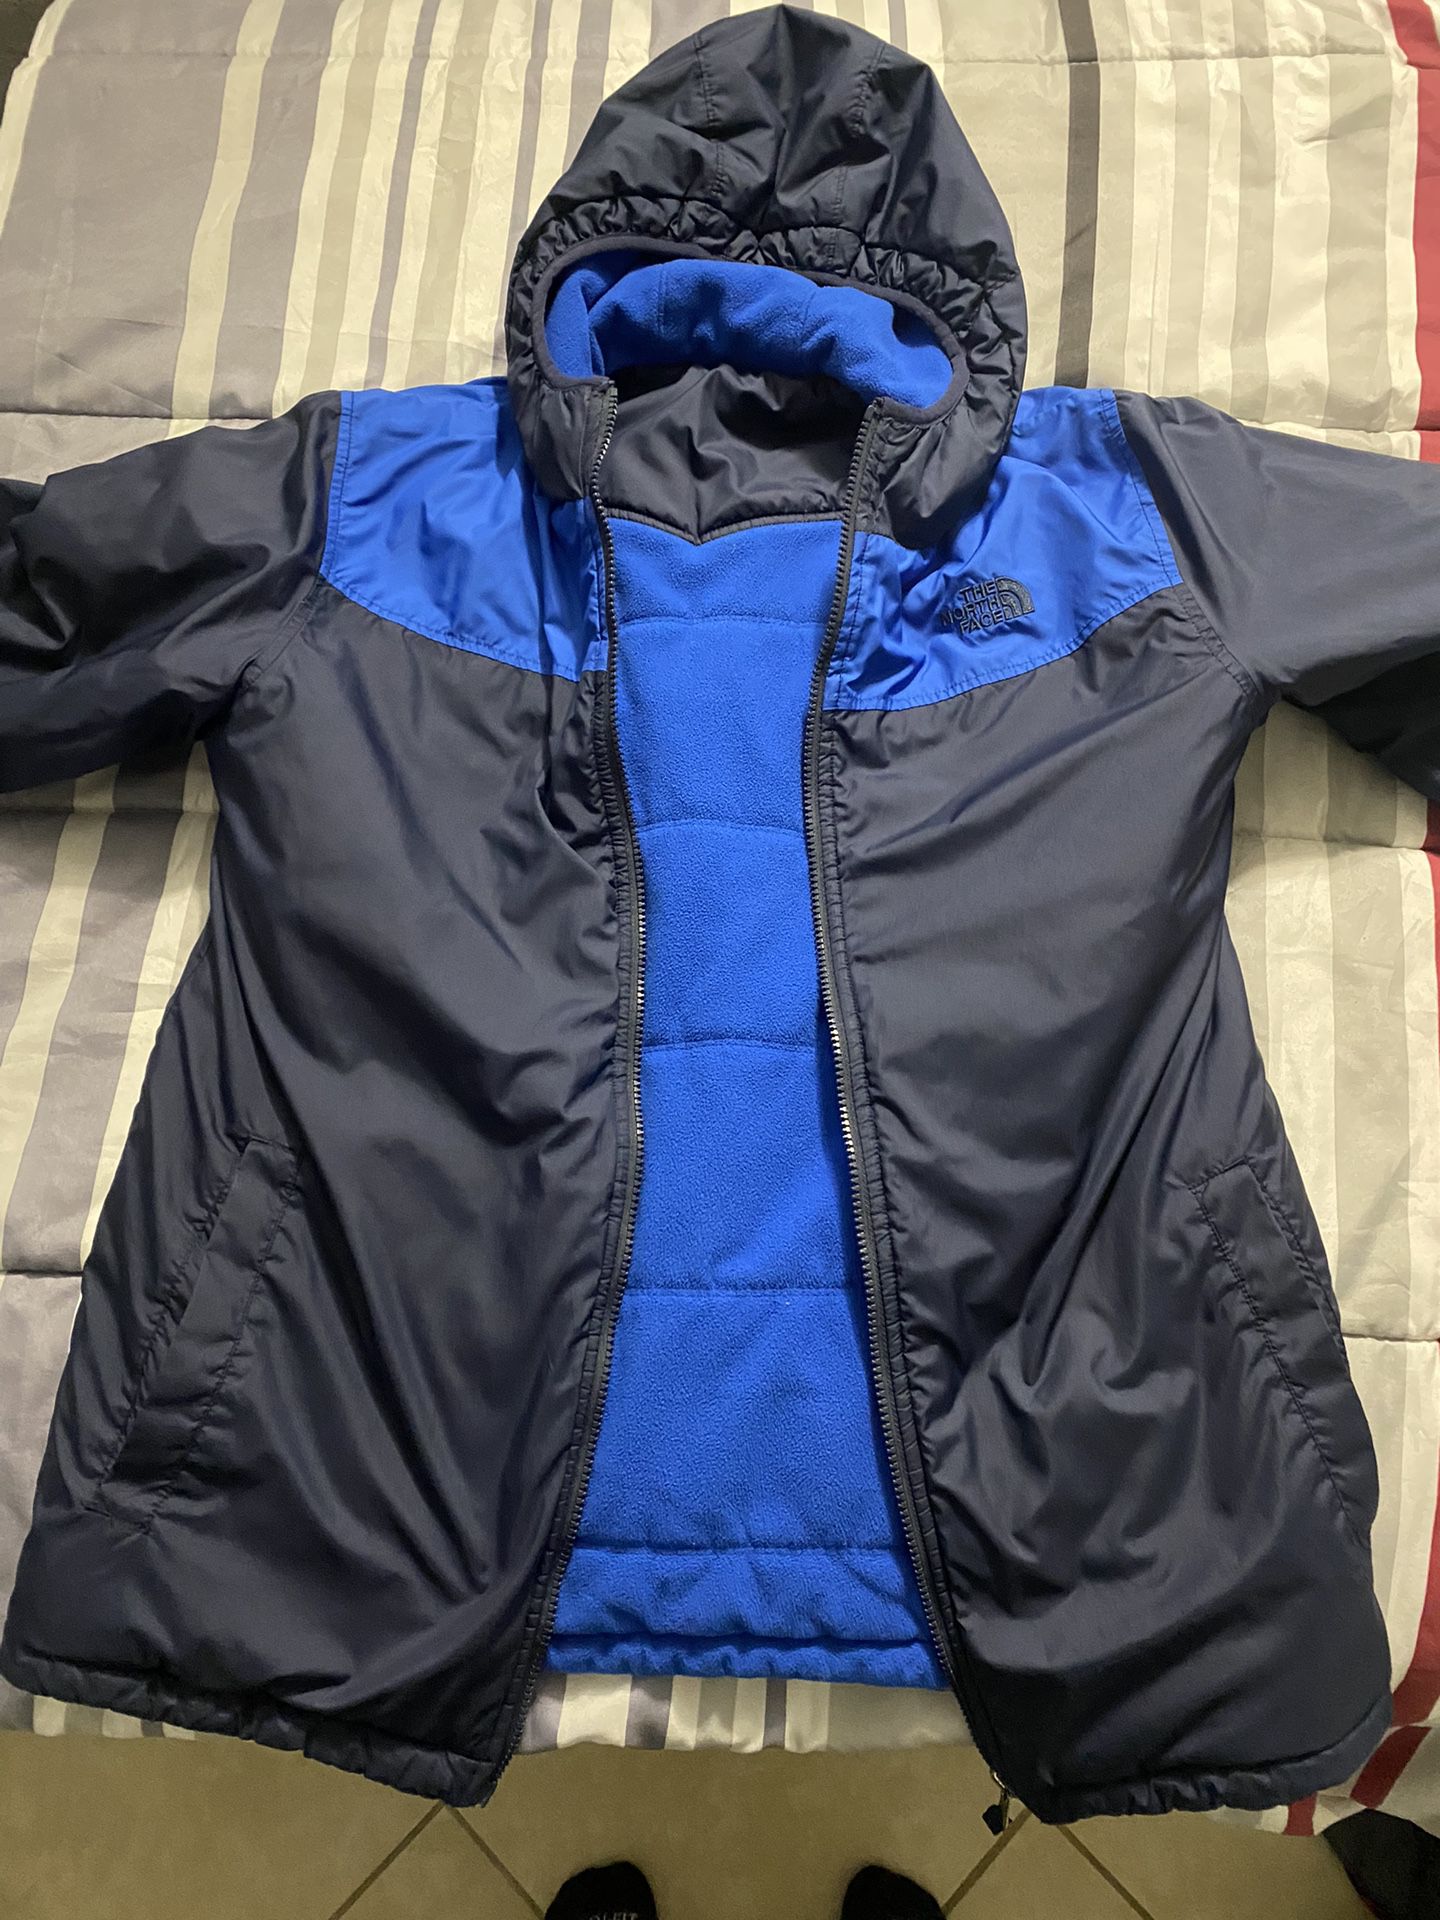 HOODIES AND COATS FOR CHEAP